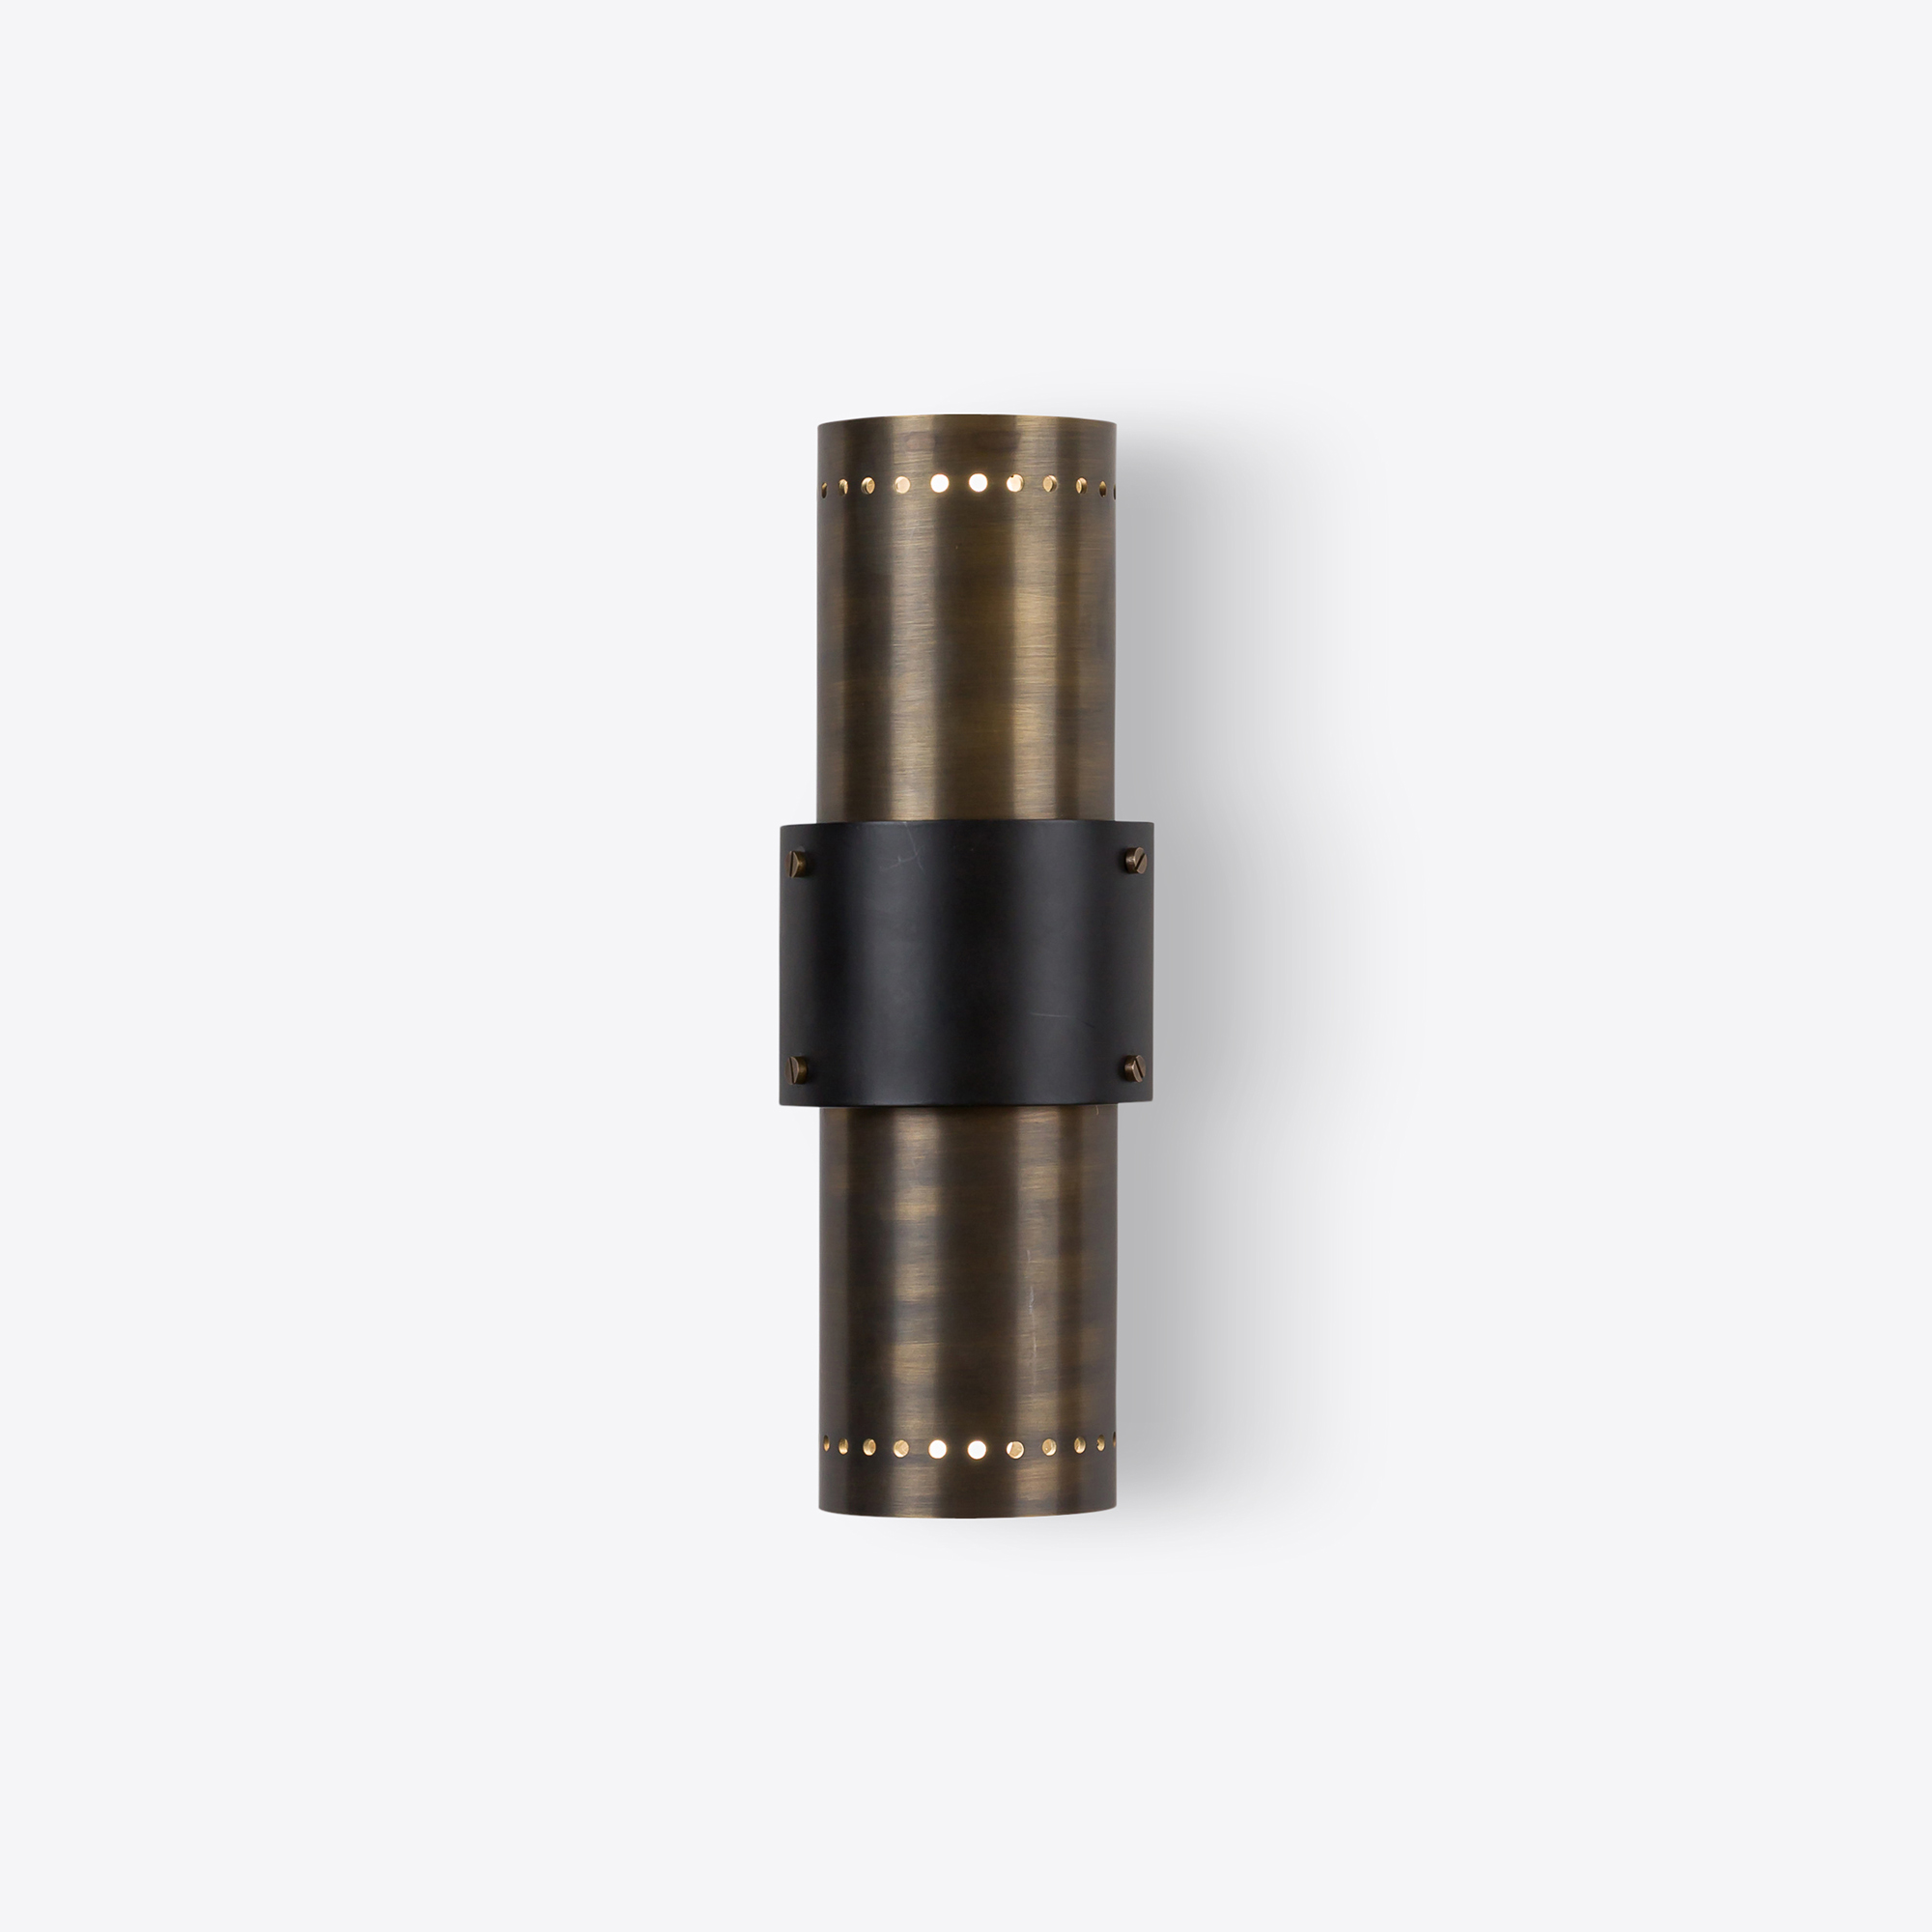 brass tubular cylindrical wall light in mid-century brutalist style - suitable for bathroom use